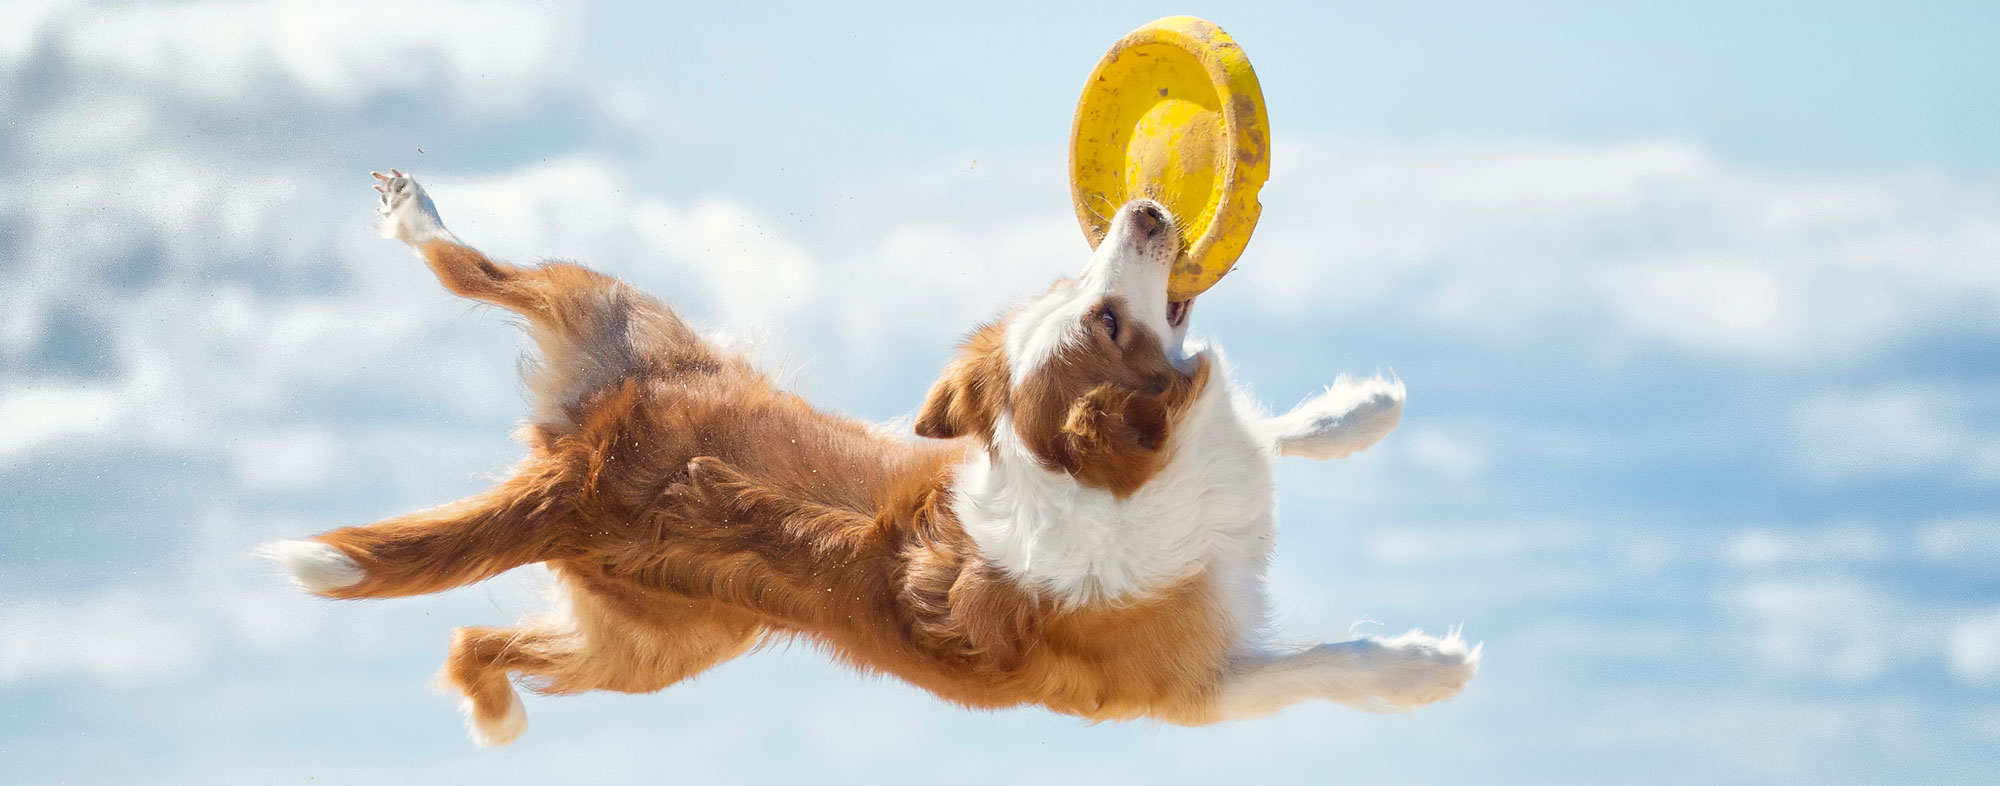 During the summer, you can train your dog to catch a frisbee